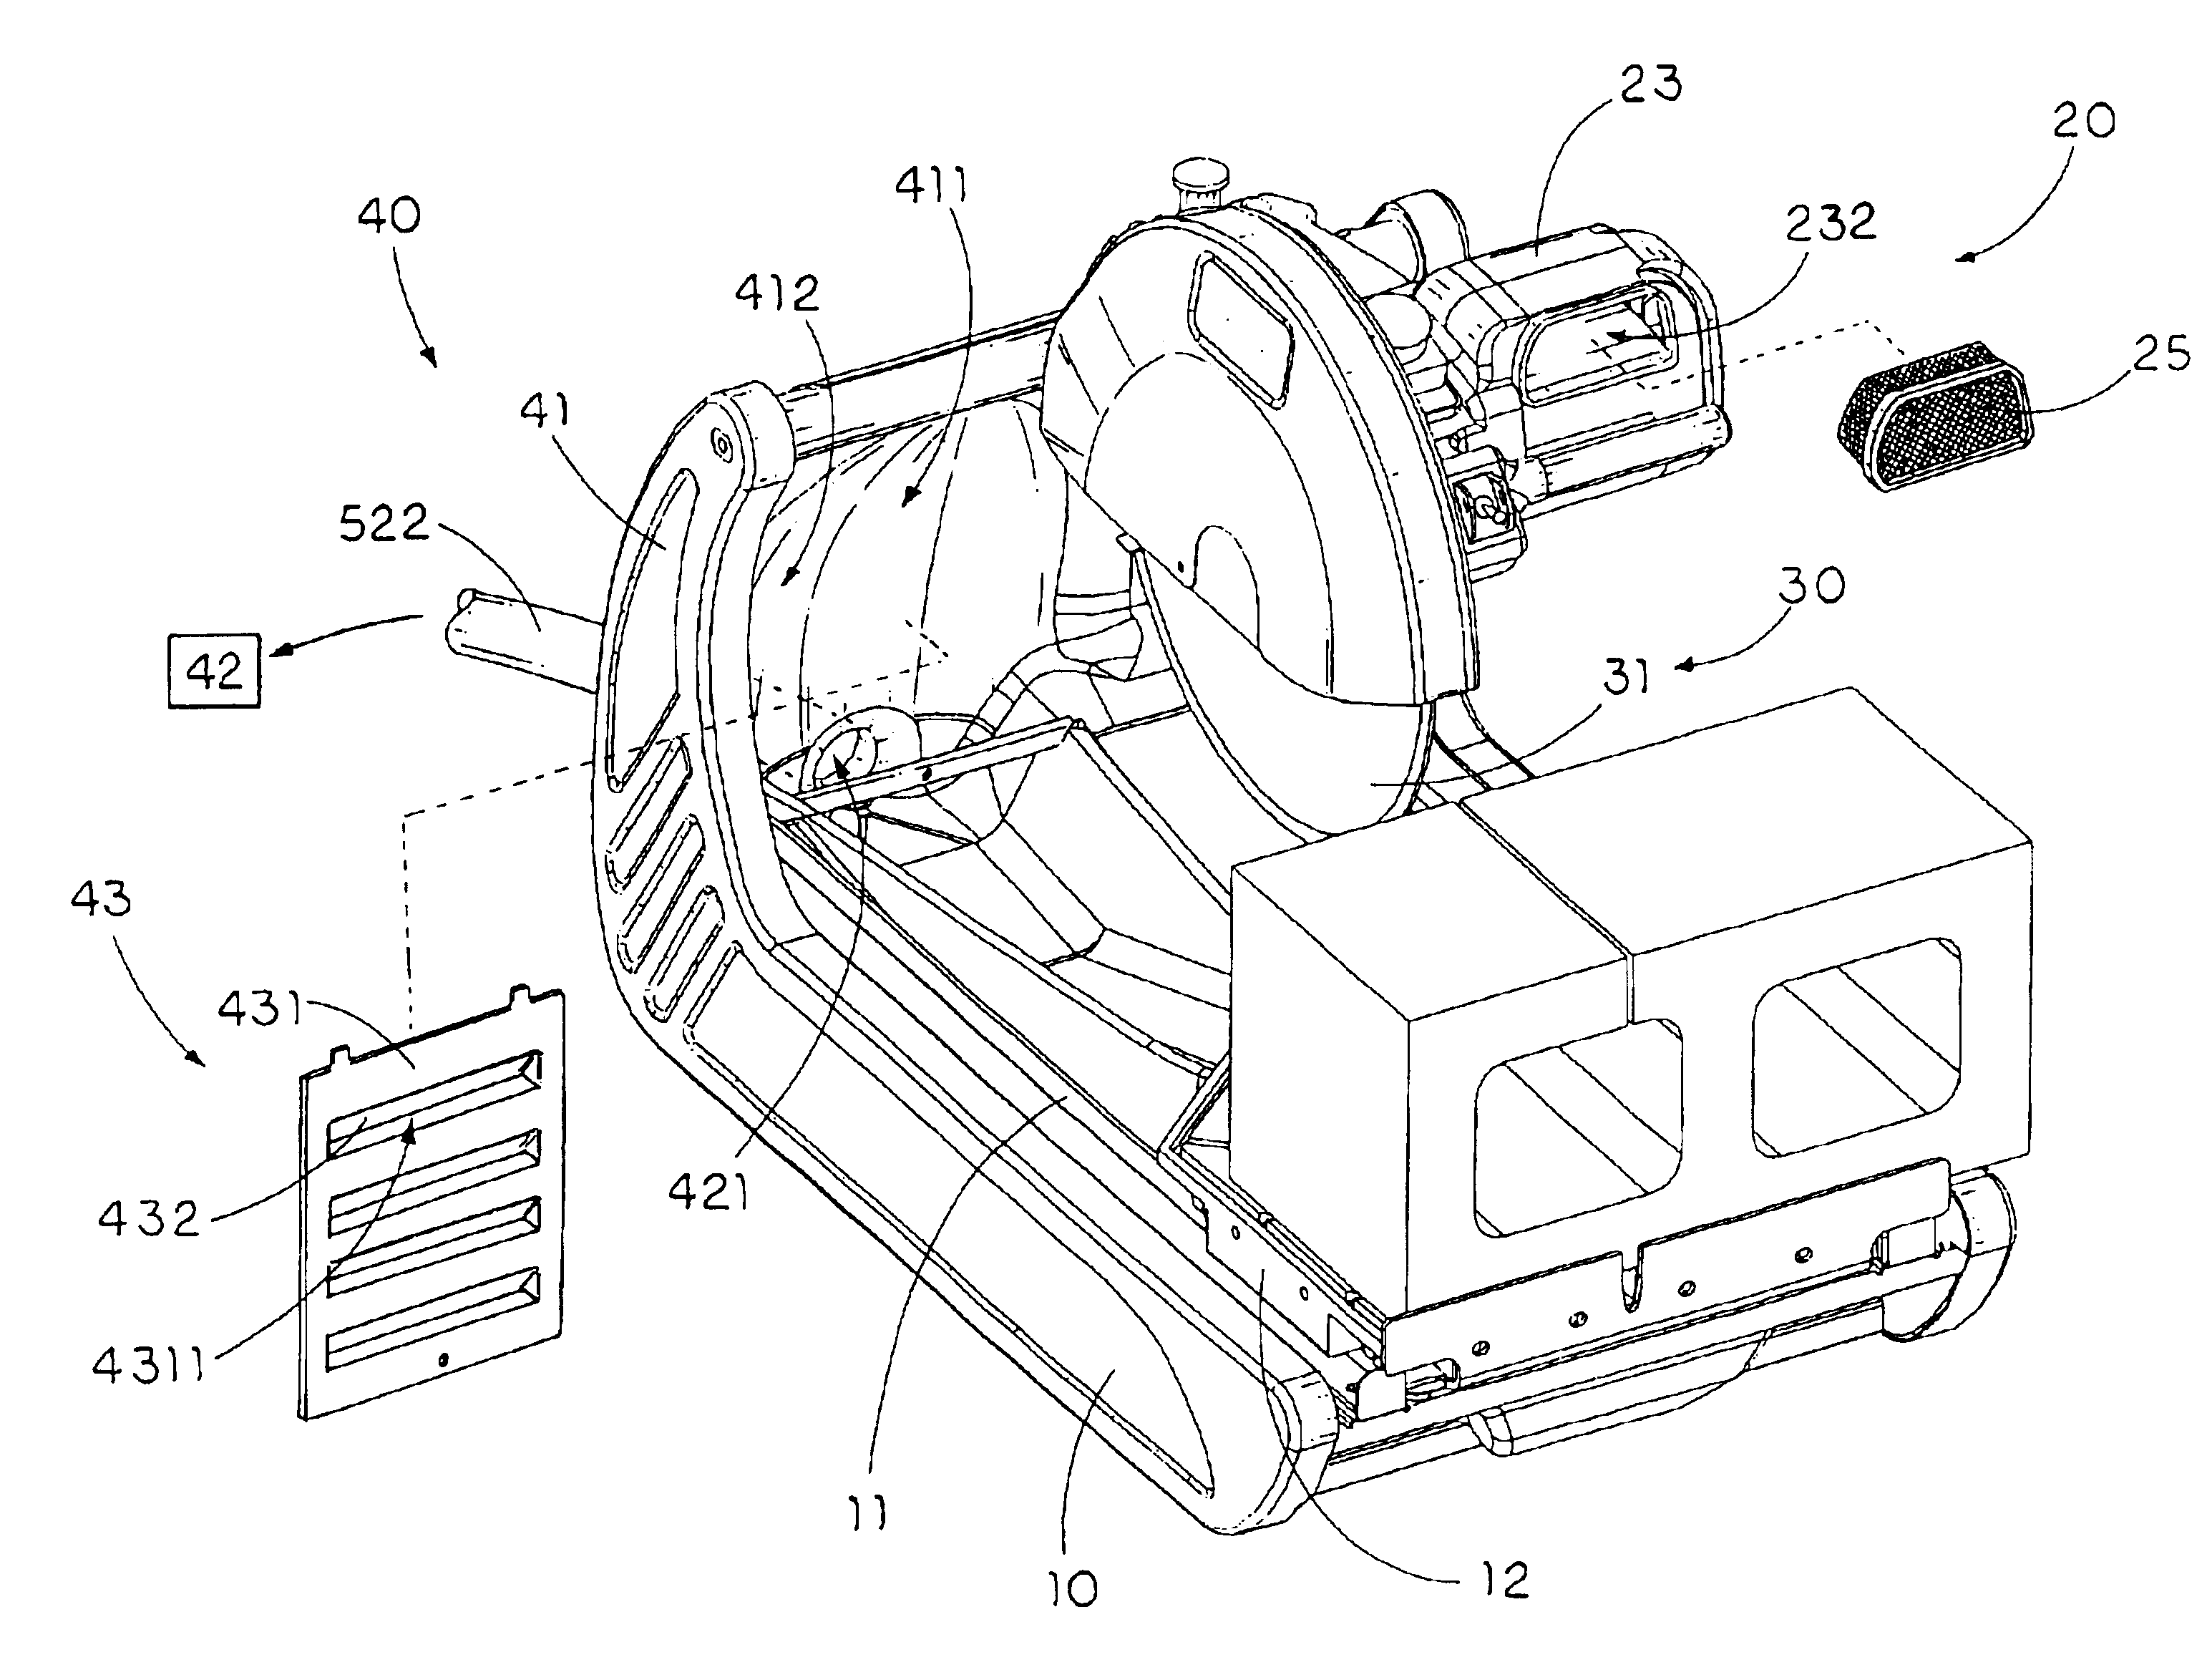 Cutting machine with environment control arrangement